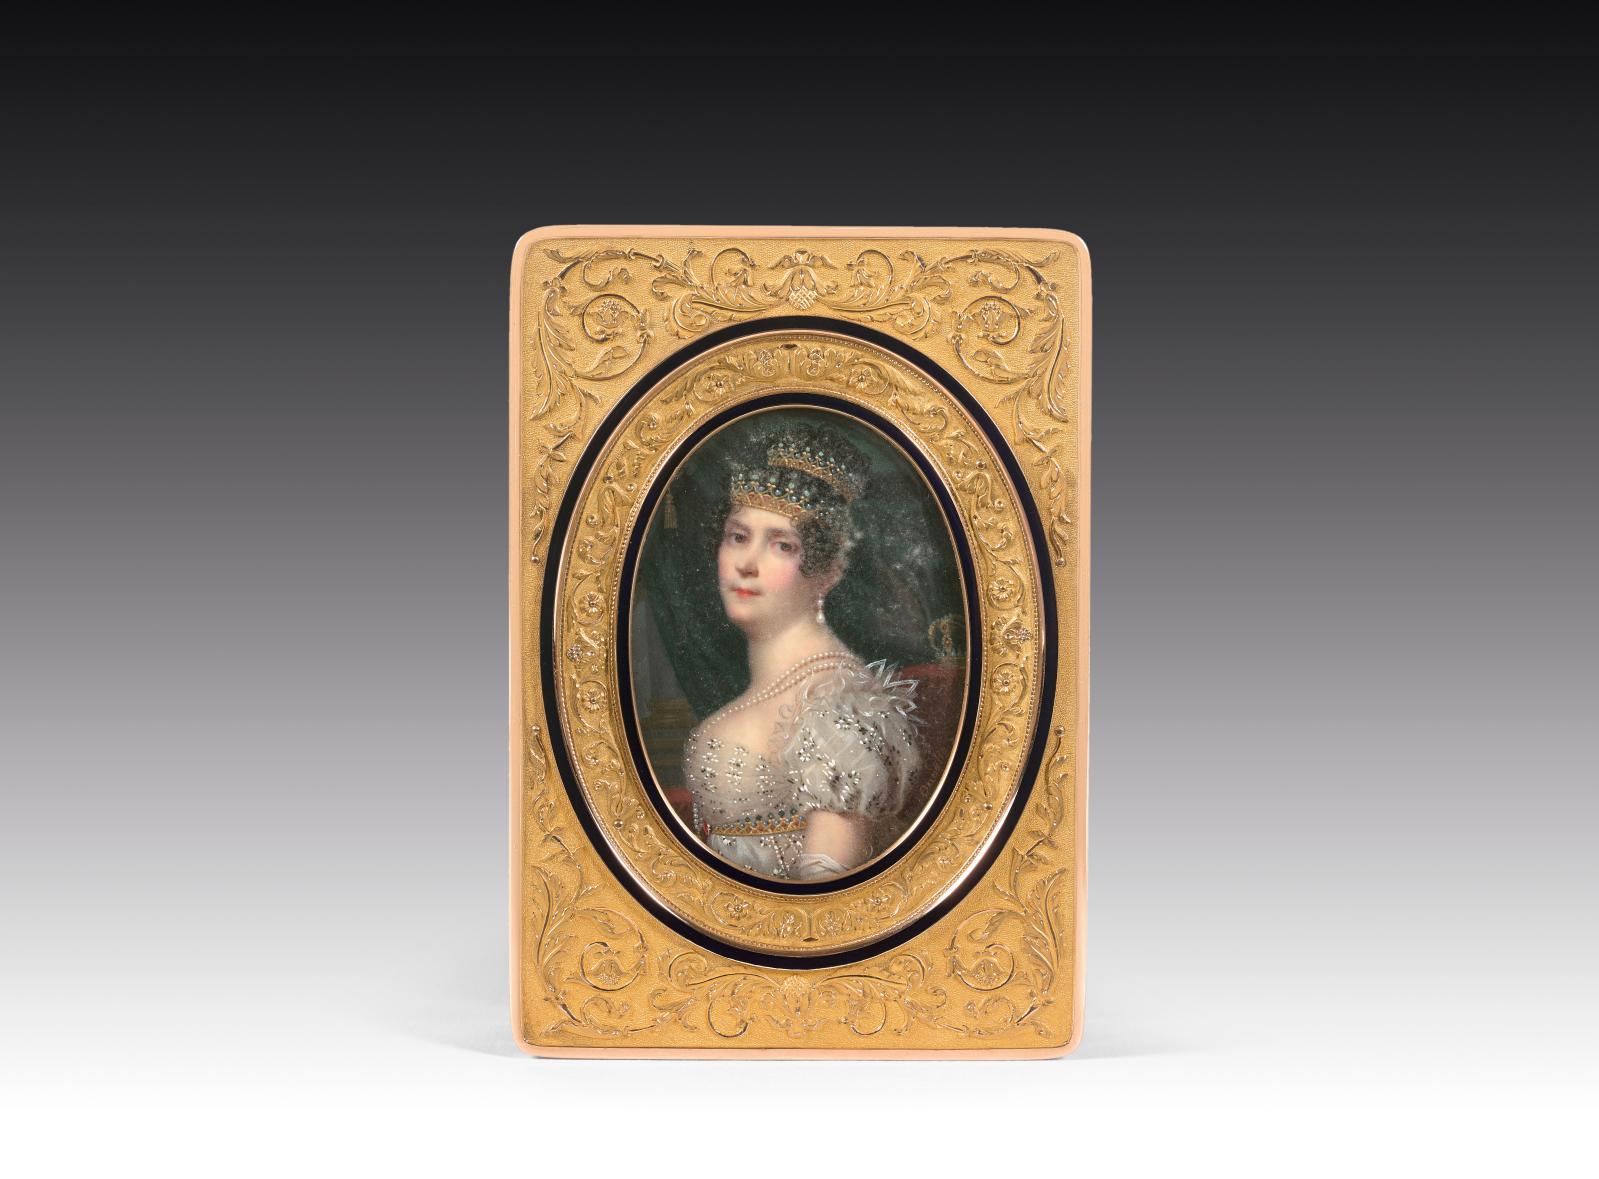 A Snuffbox from the Empress Josephine